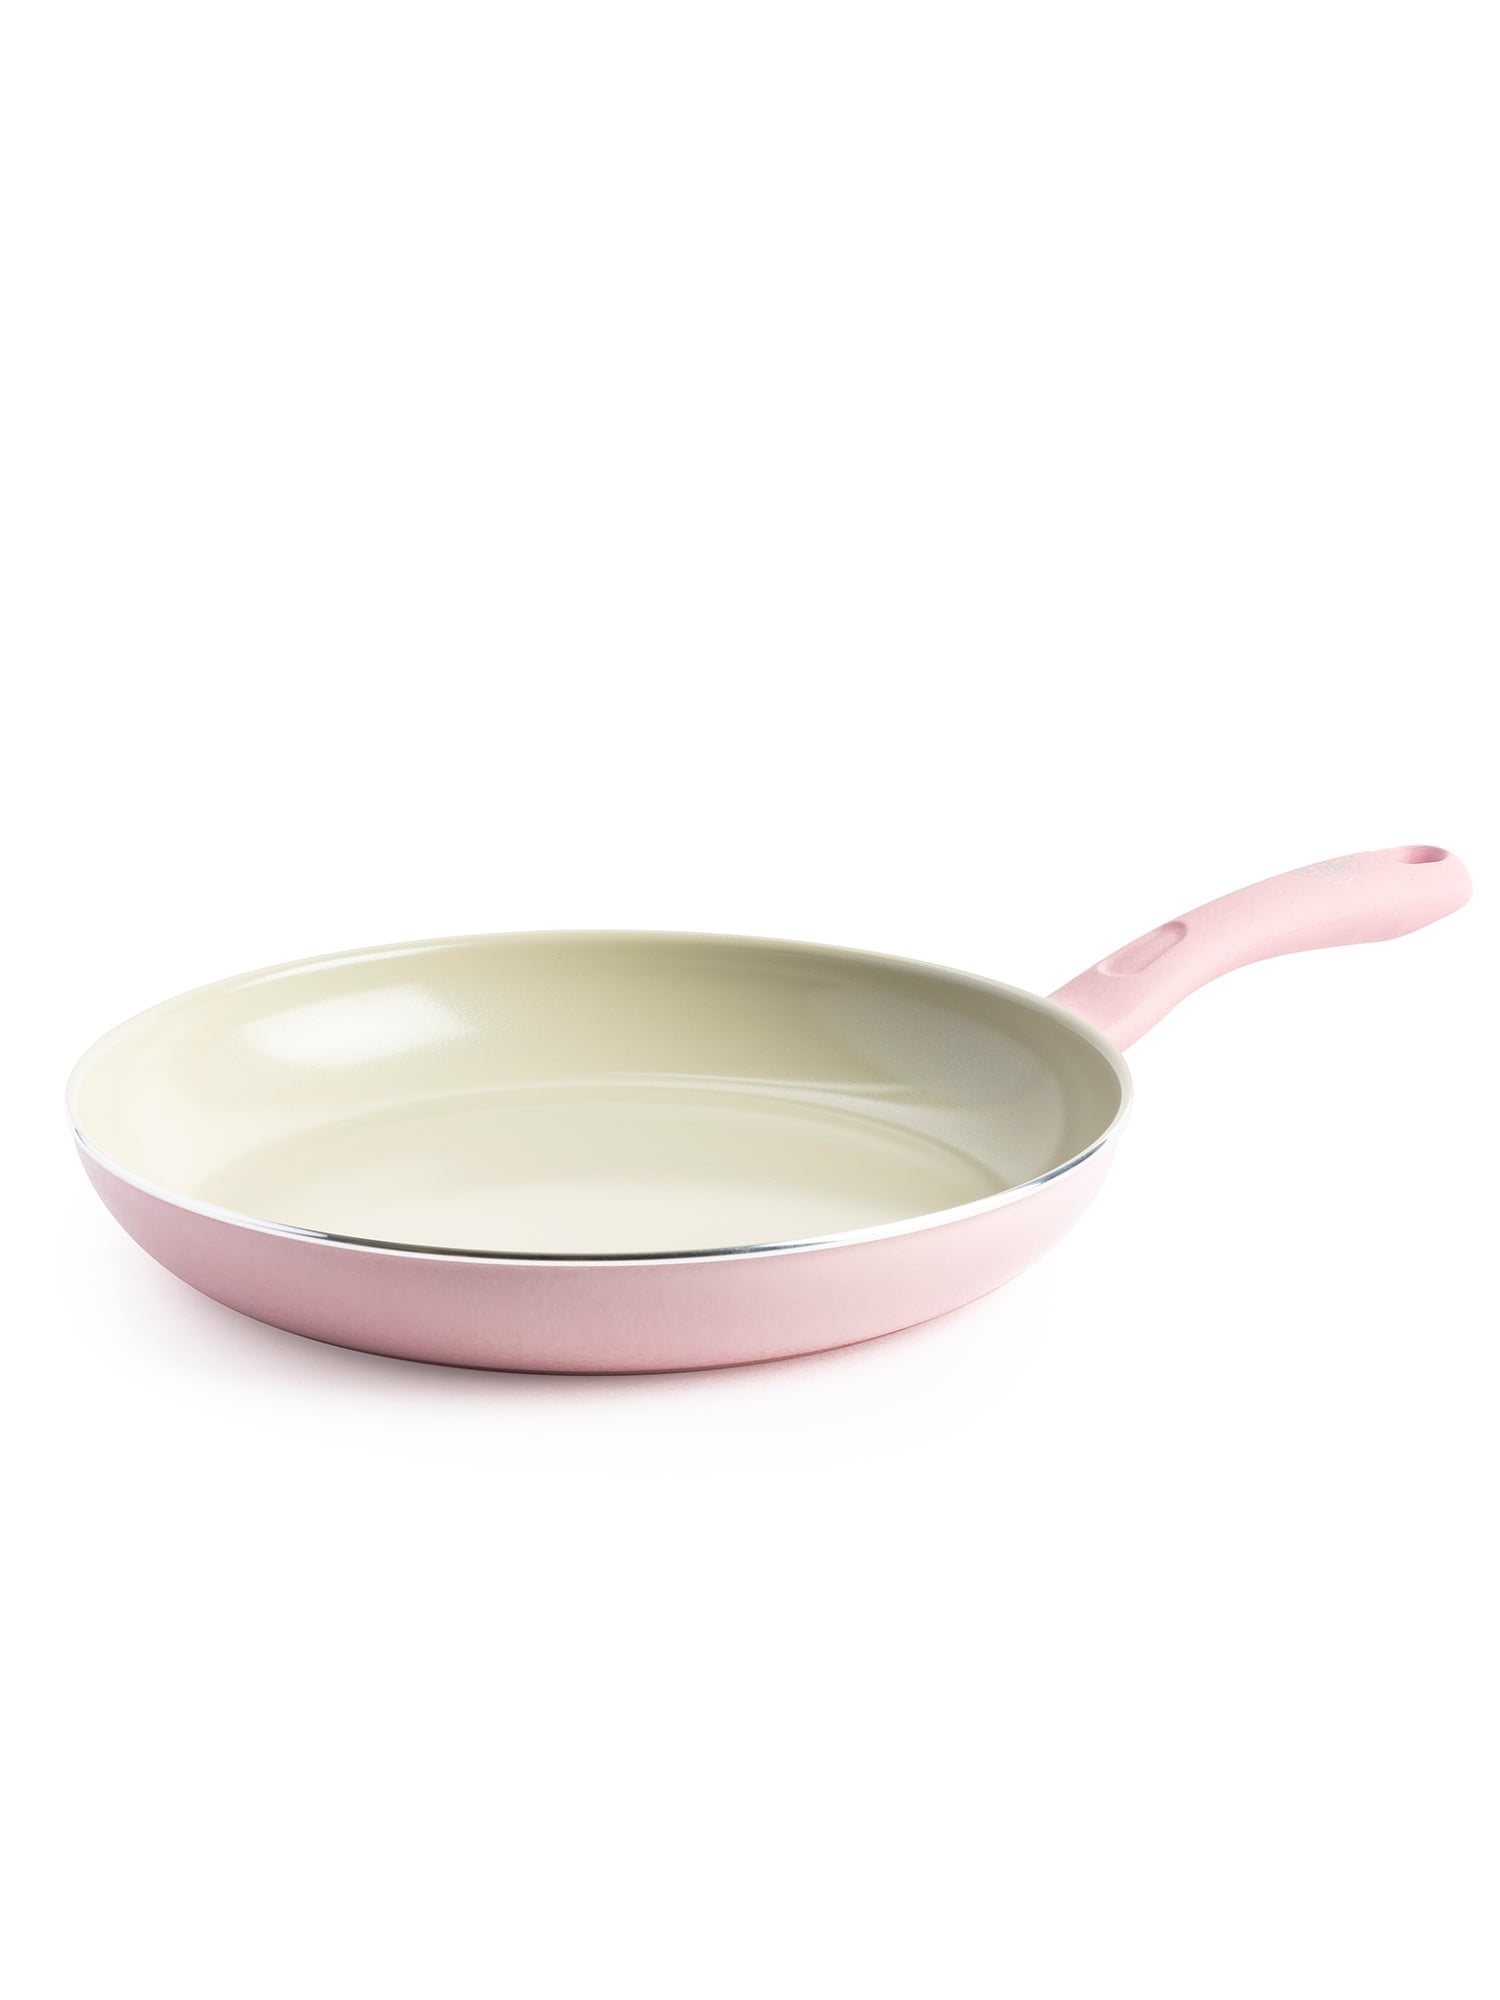 Details about   Green Diamond Ceramic Nonstick 12 inch Open Frying Pan 